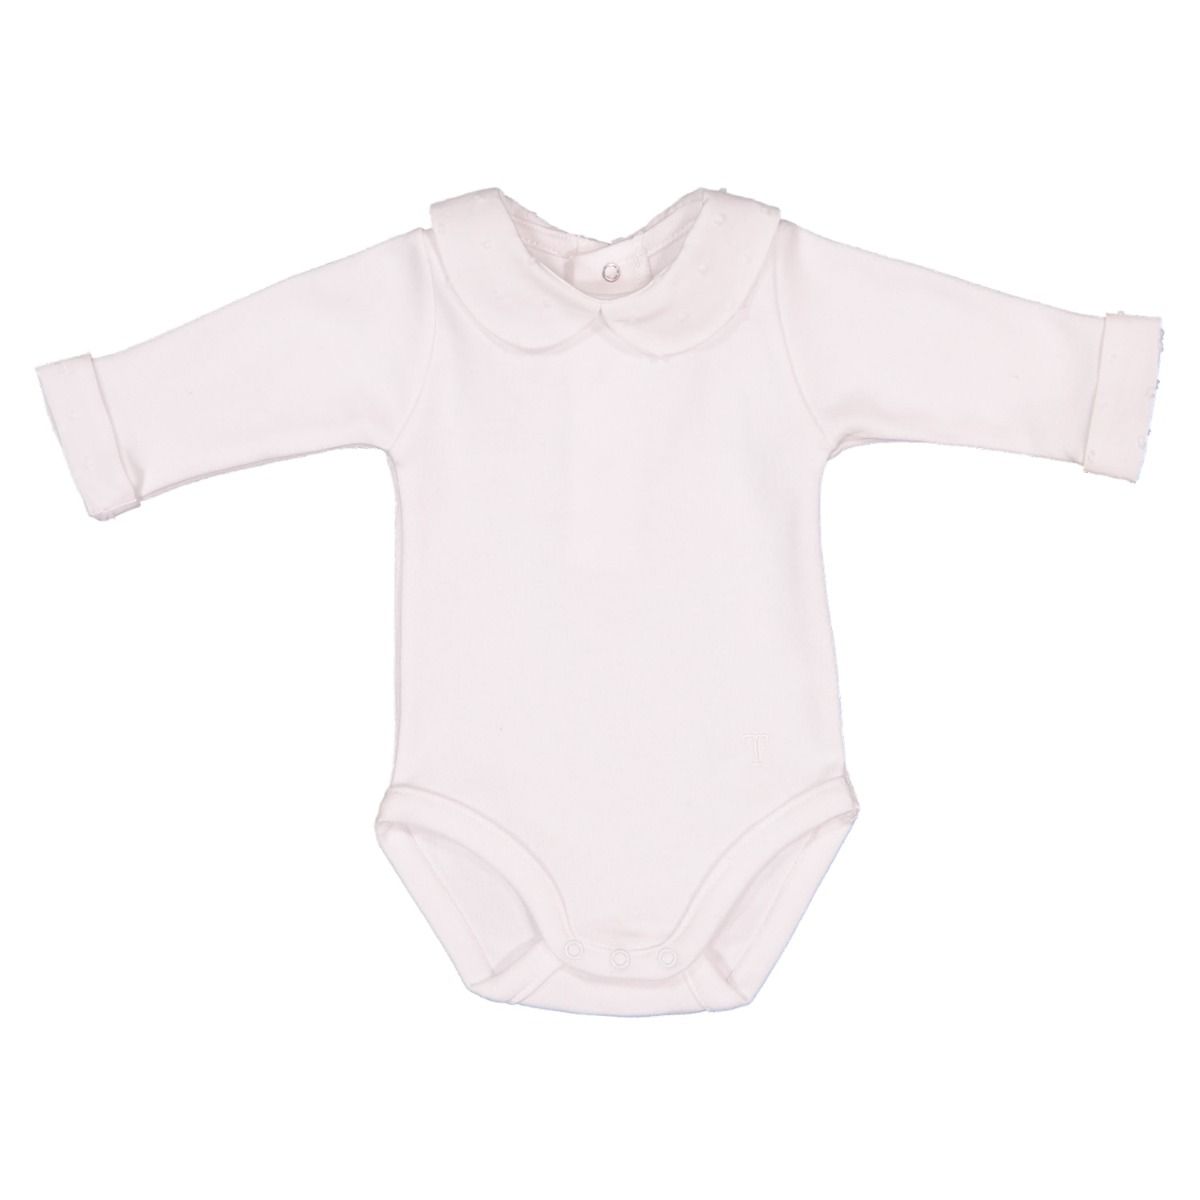 Elegance and comfort give life to Tierno Timeless Classic Bodyvest, a must-have for any newborn closet that lasts for many generations. Perfect to lay under our Tierno Timeless Classic Bloomers or to look stunning with our Tierno Green Bonnet and Booties,